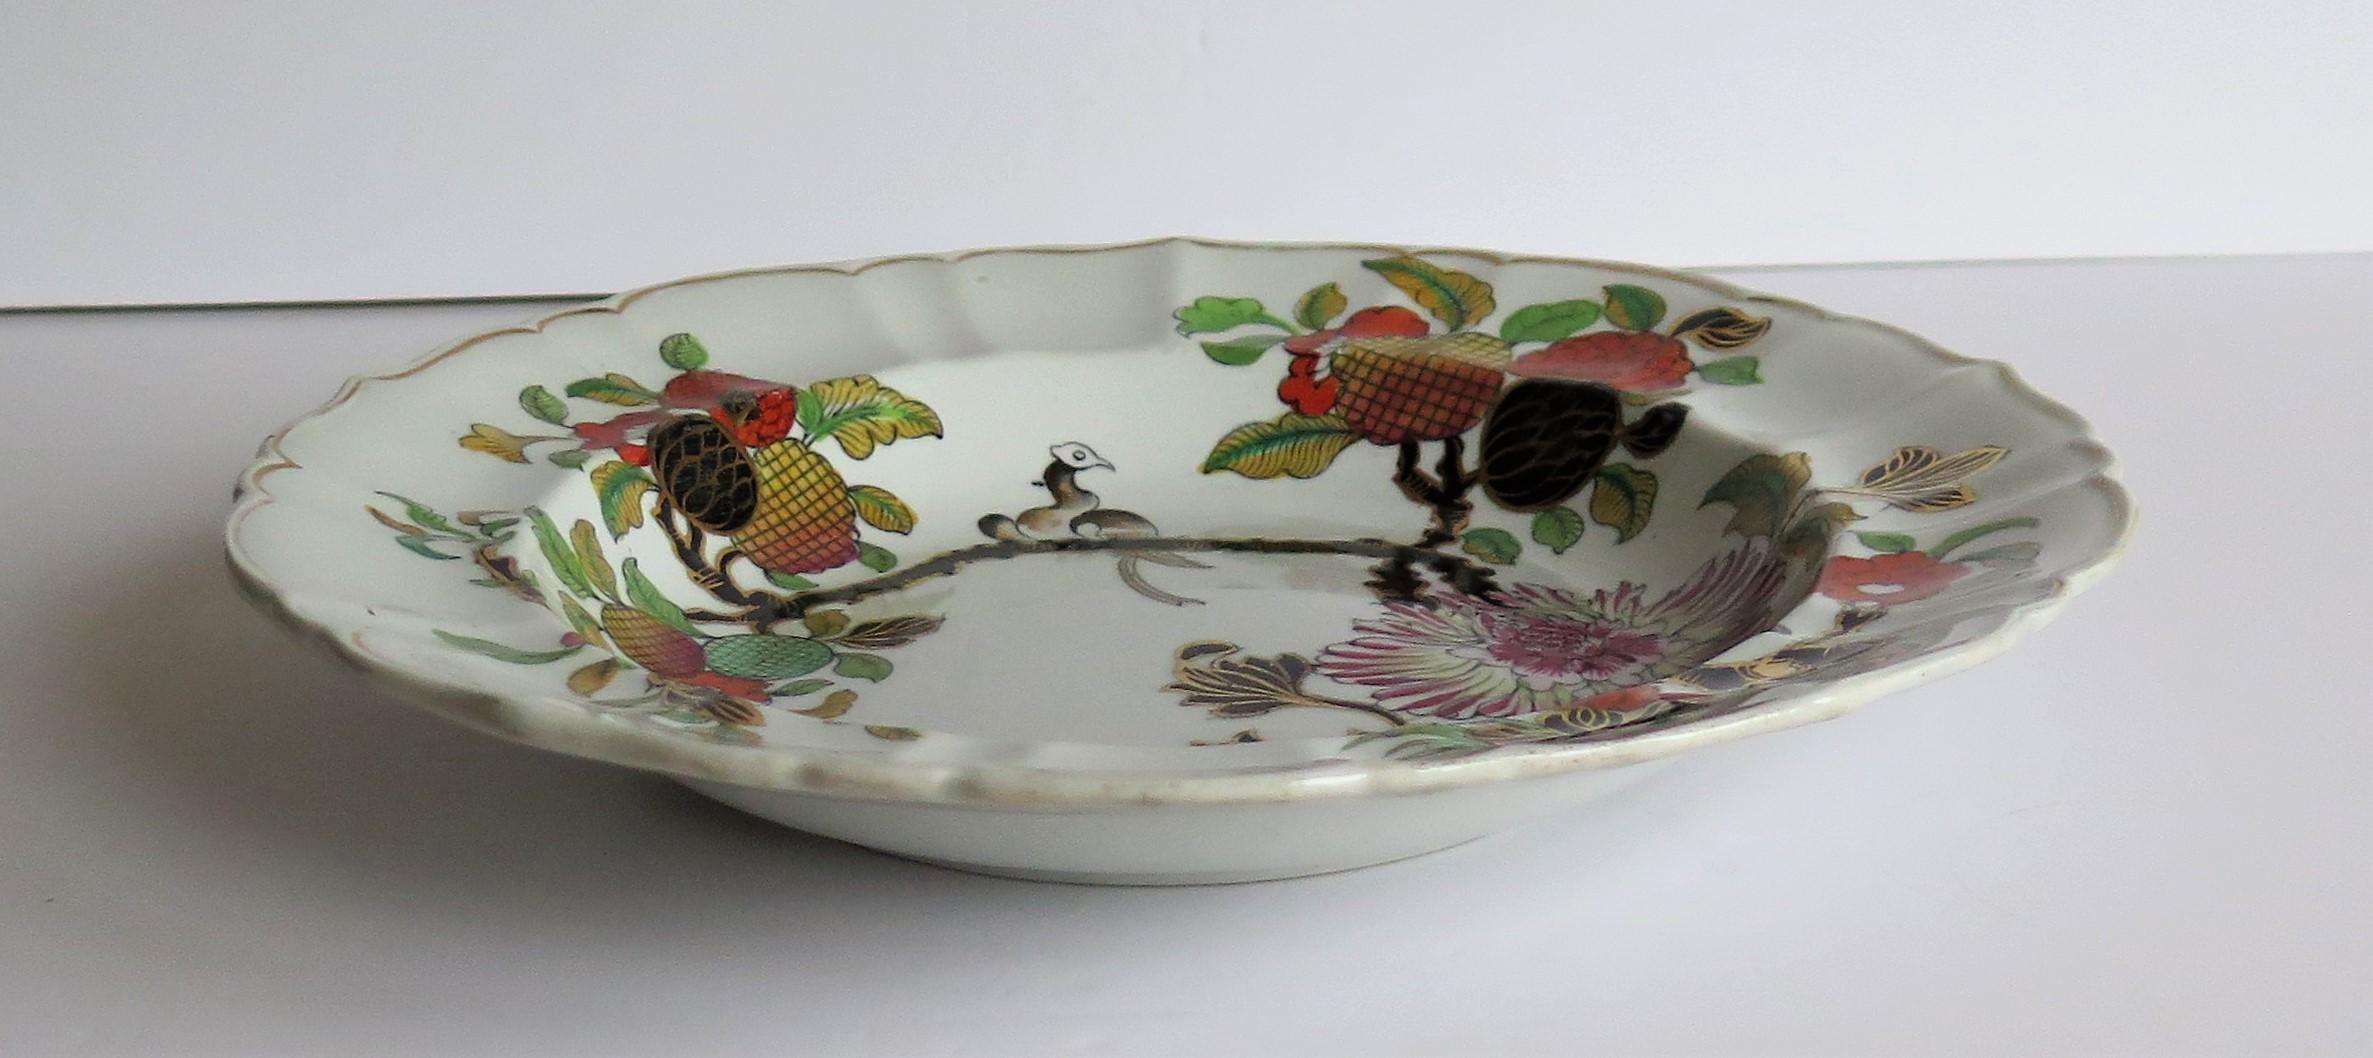 Mason's Ironstone Soup Bowl or Plate Hand Painted Wood Pigeon Pattern circa 1830 5